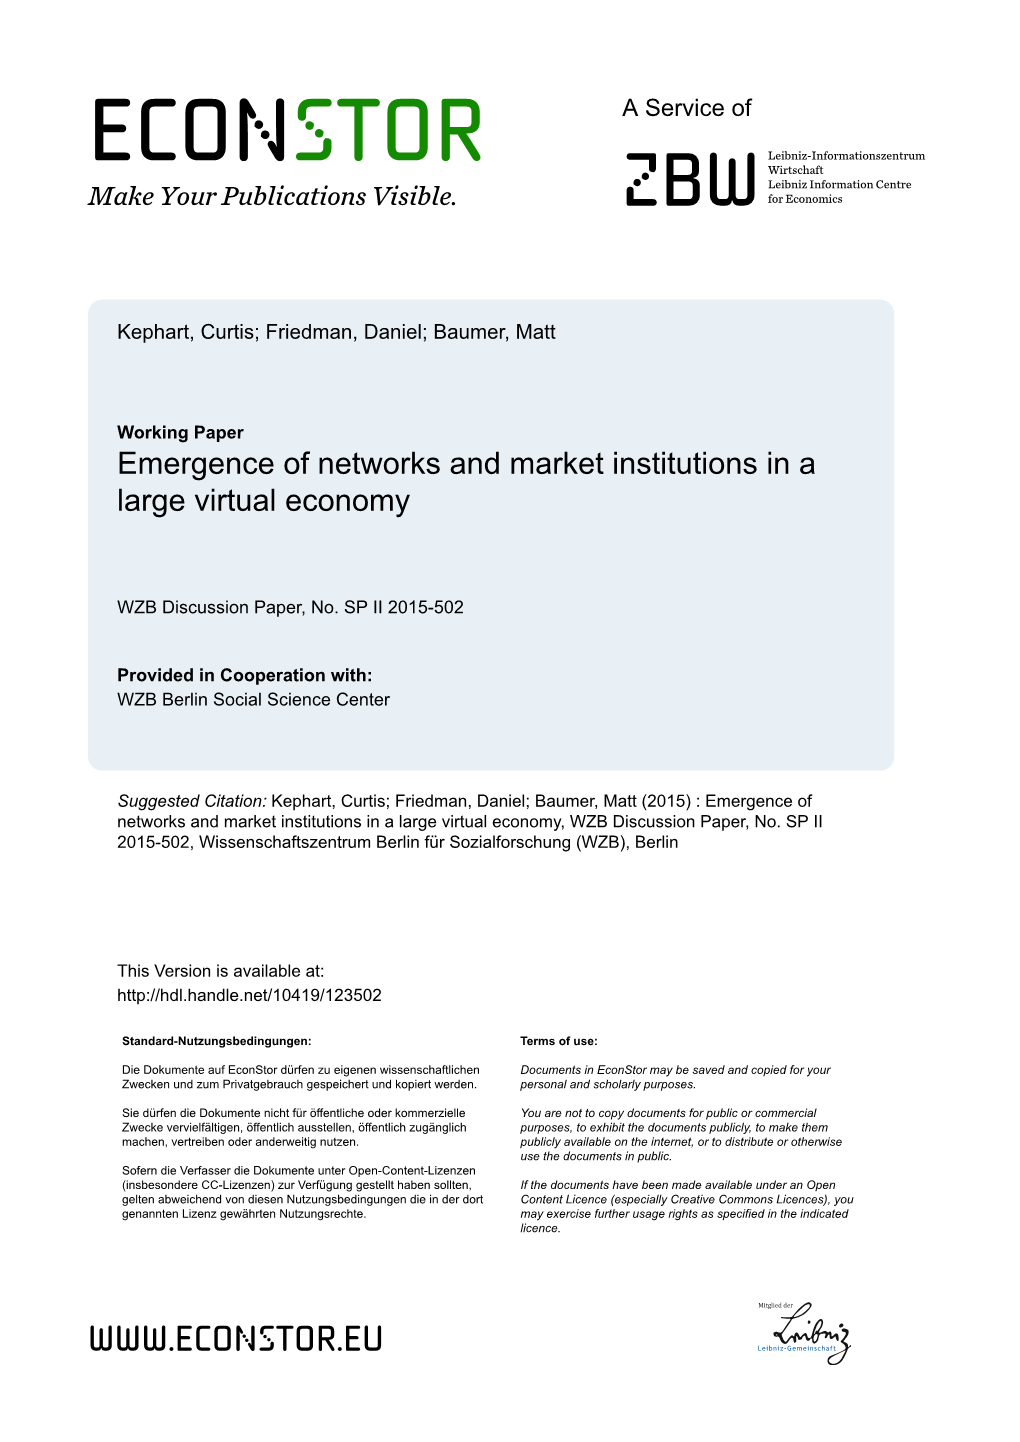 Emergence of Networks and Market Institutions in a Large Virtual Economy